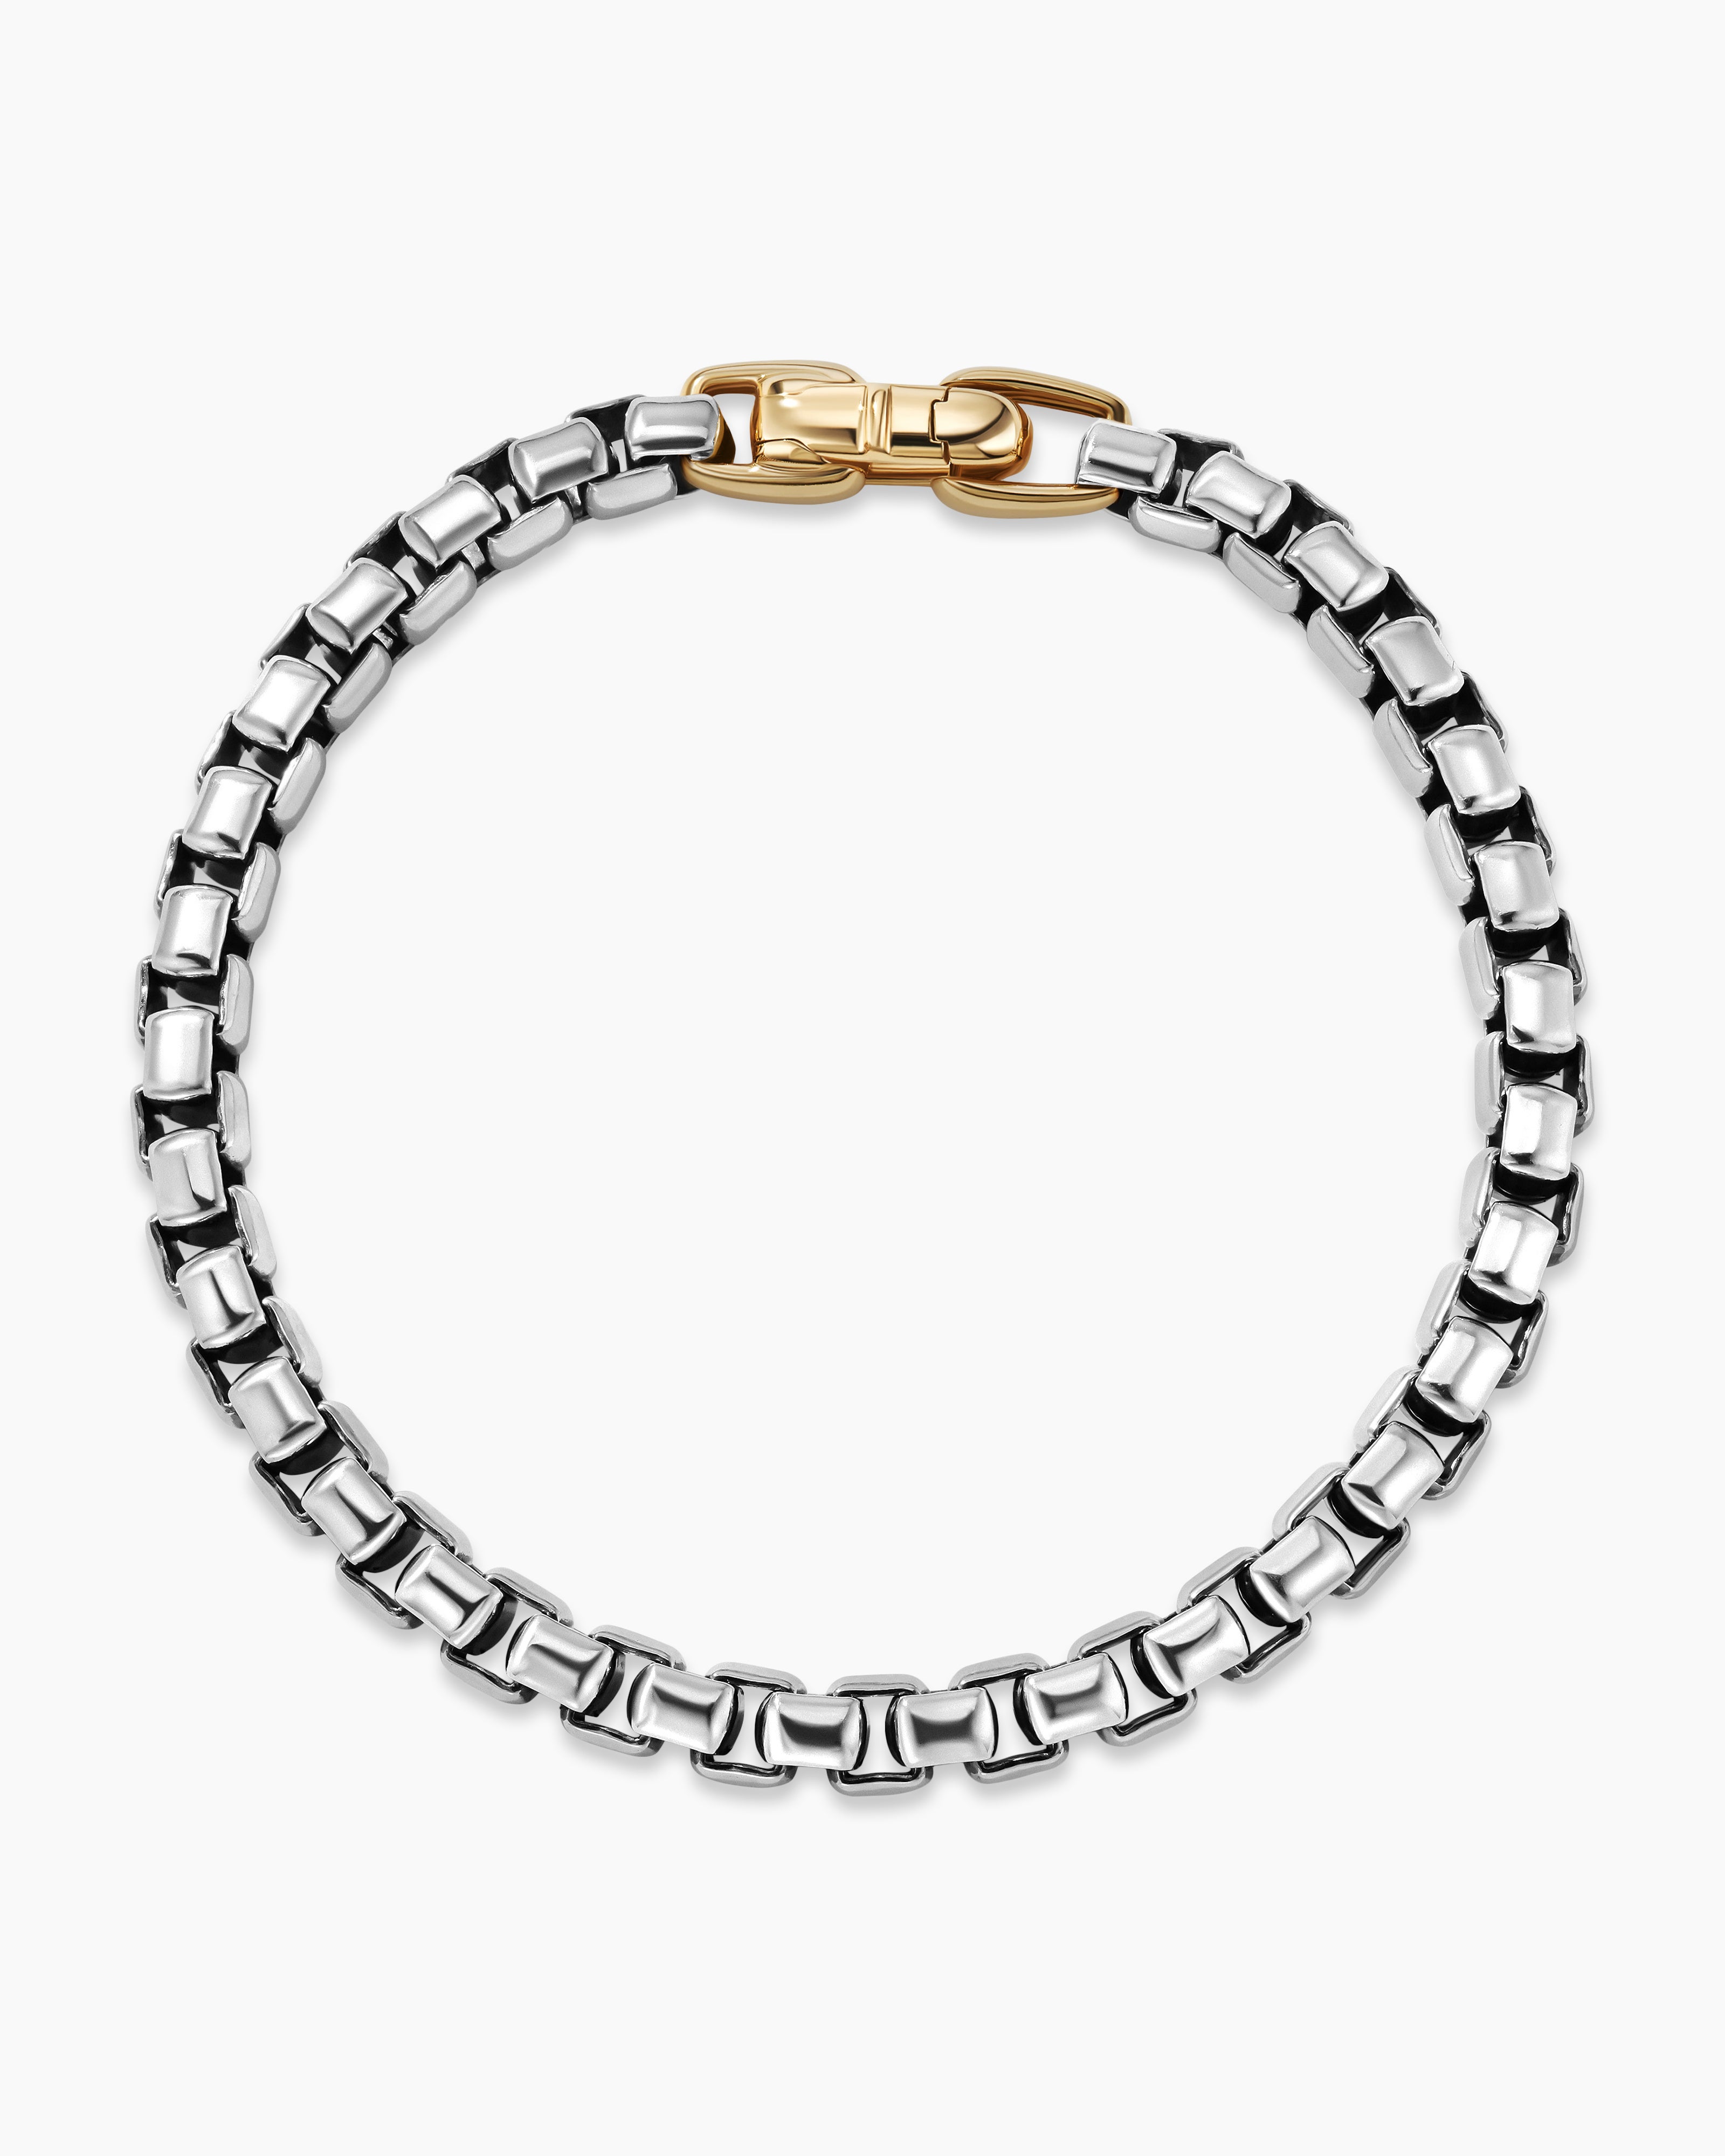 DY Bel Aire Box Chain Yurman | Bracelet David 14K 6mm with Silver in Sterling Yellow Gold